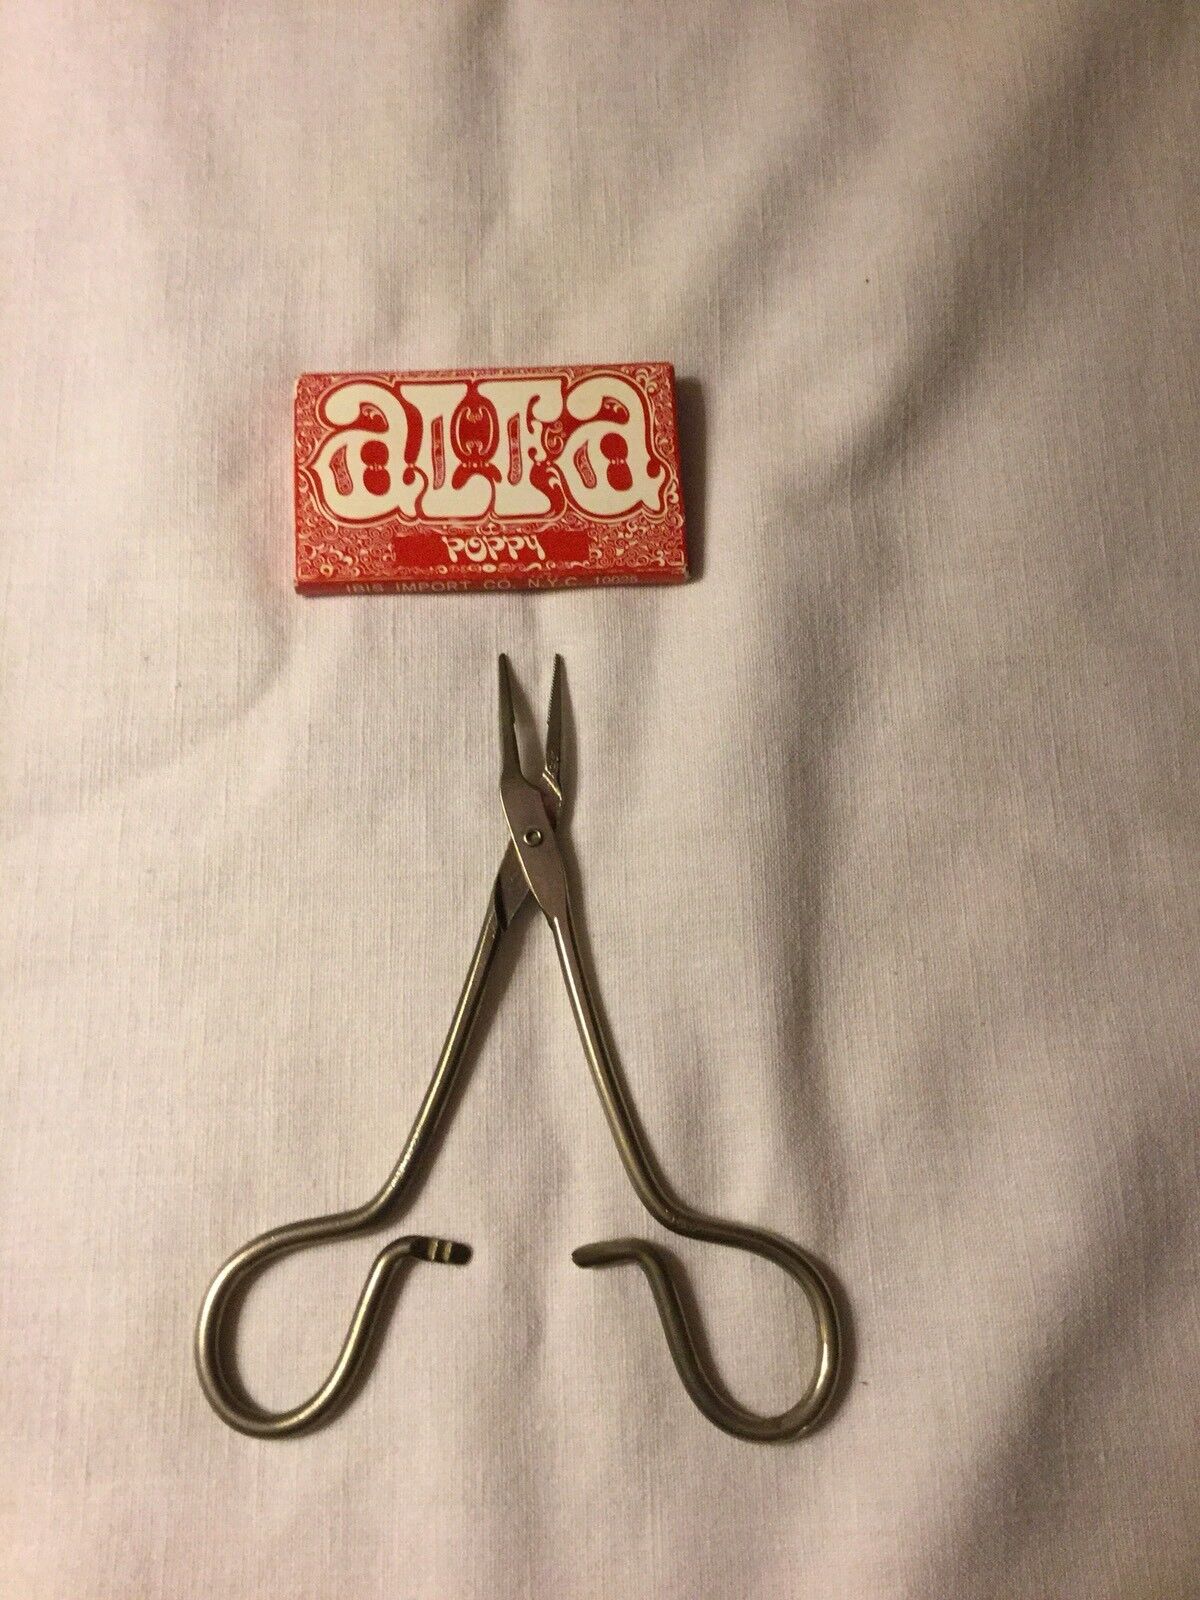 Stainless Steel 5 1/2 Inches Hemostat Roach Clip Alfa Rolling Papers Vintage